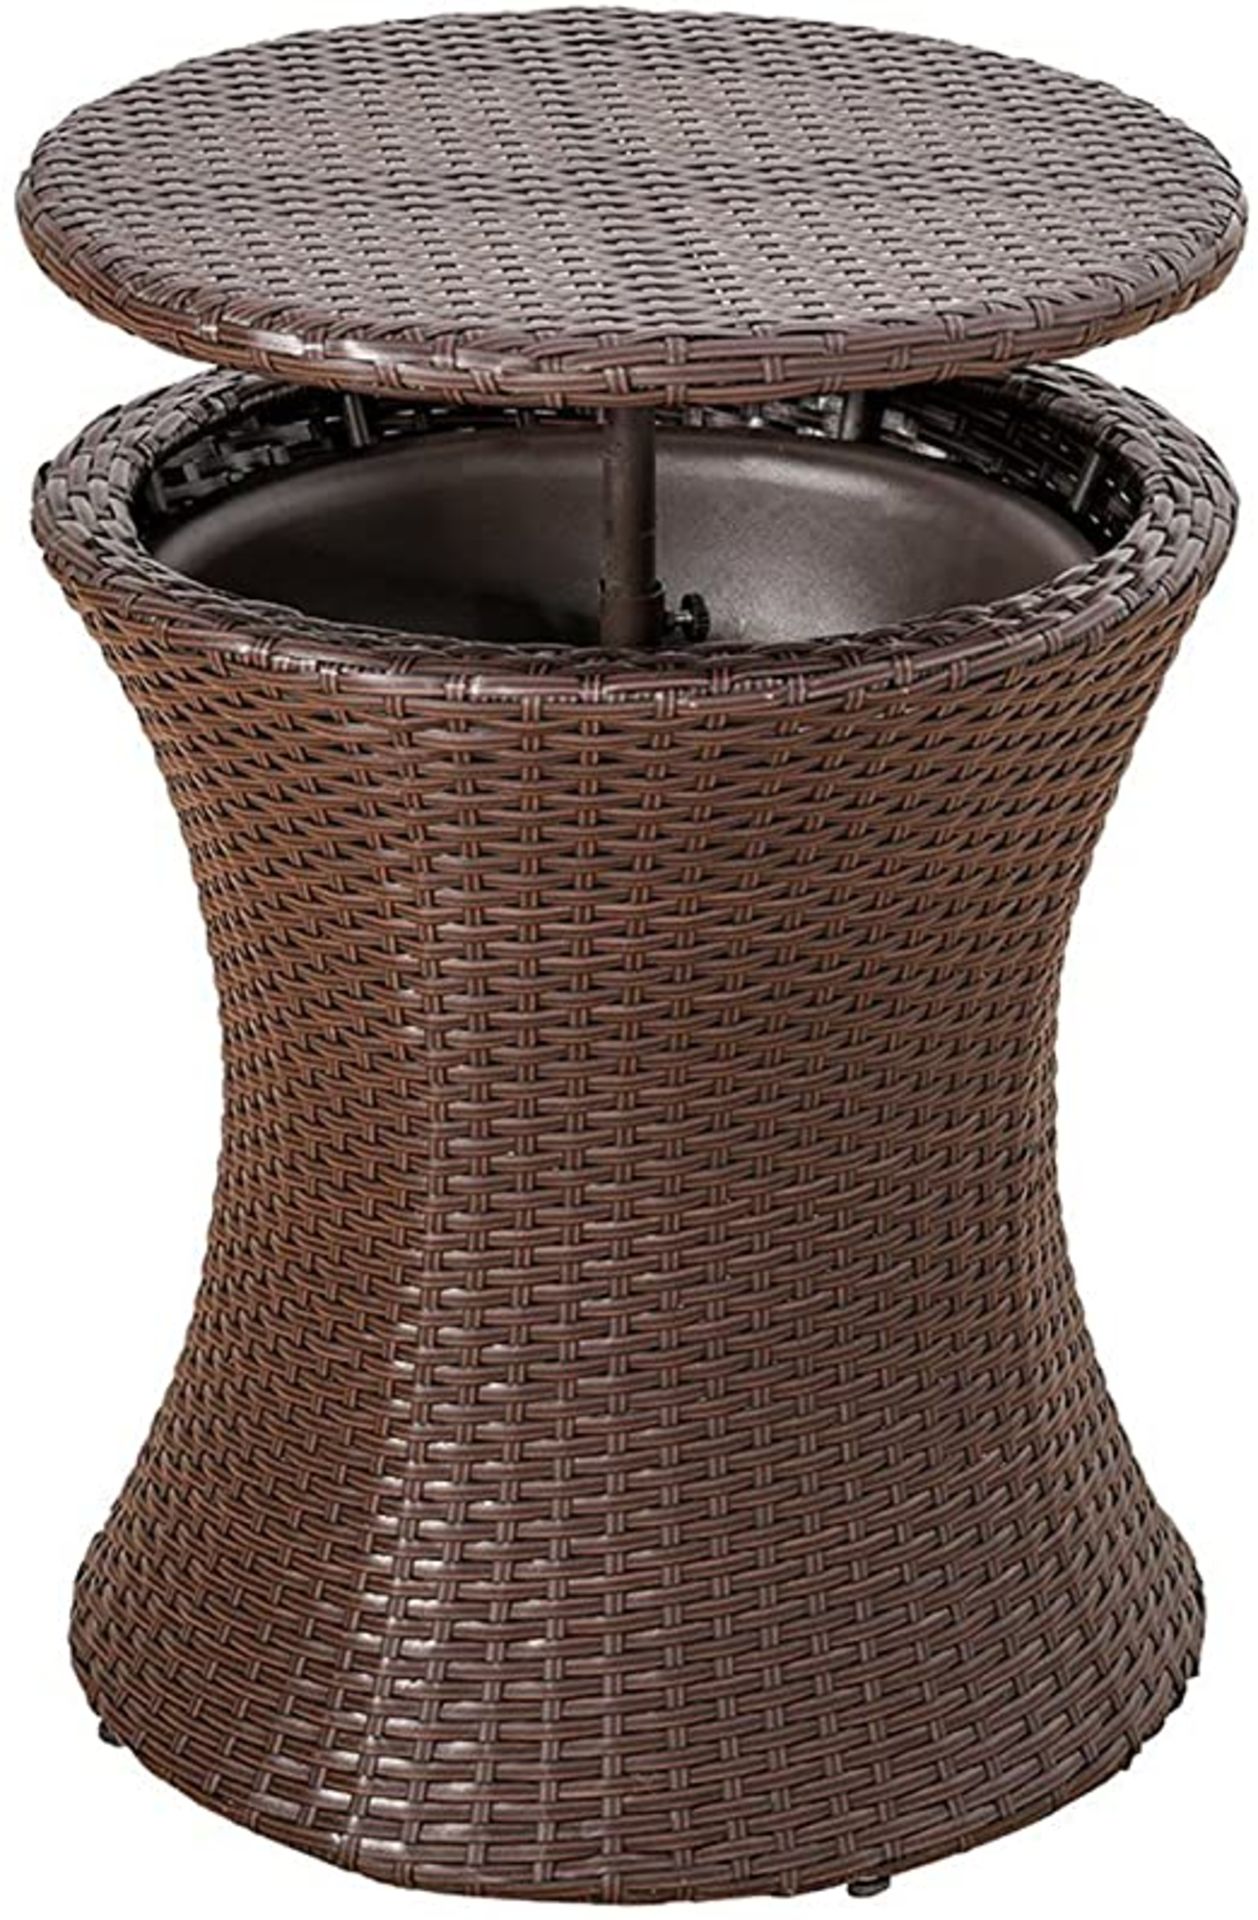 + VAT Brand New The Chelsea Garden Company Brown Rattan Bar Table With Ice Cooler - Patio Cooler - Image 2 of 3